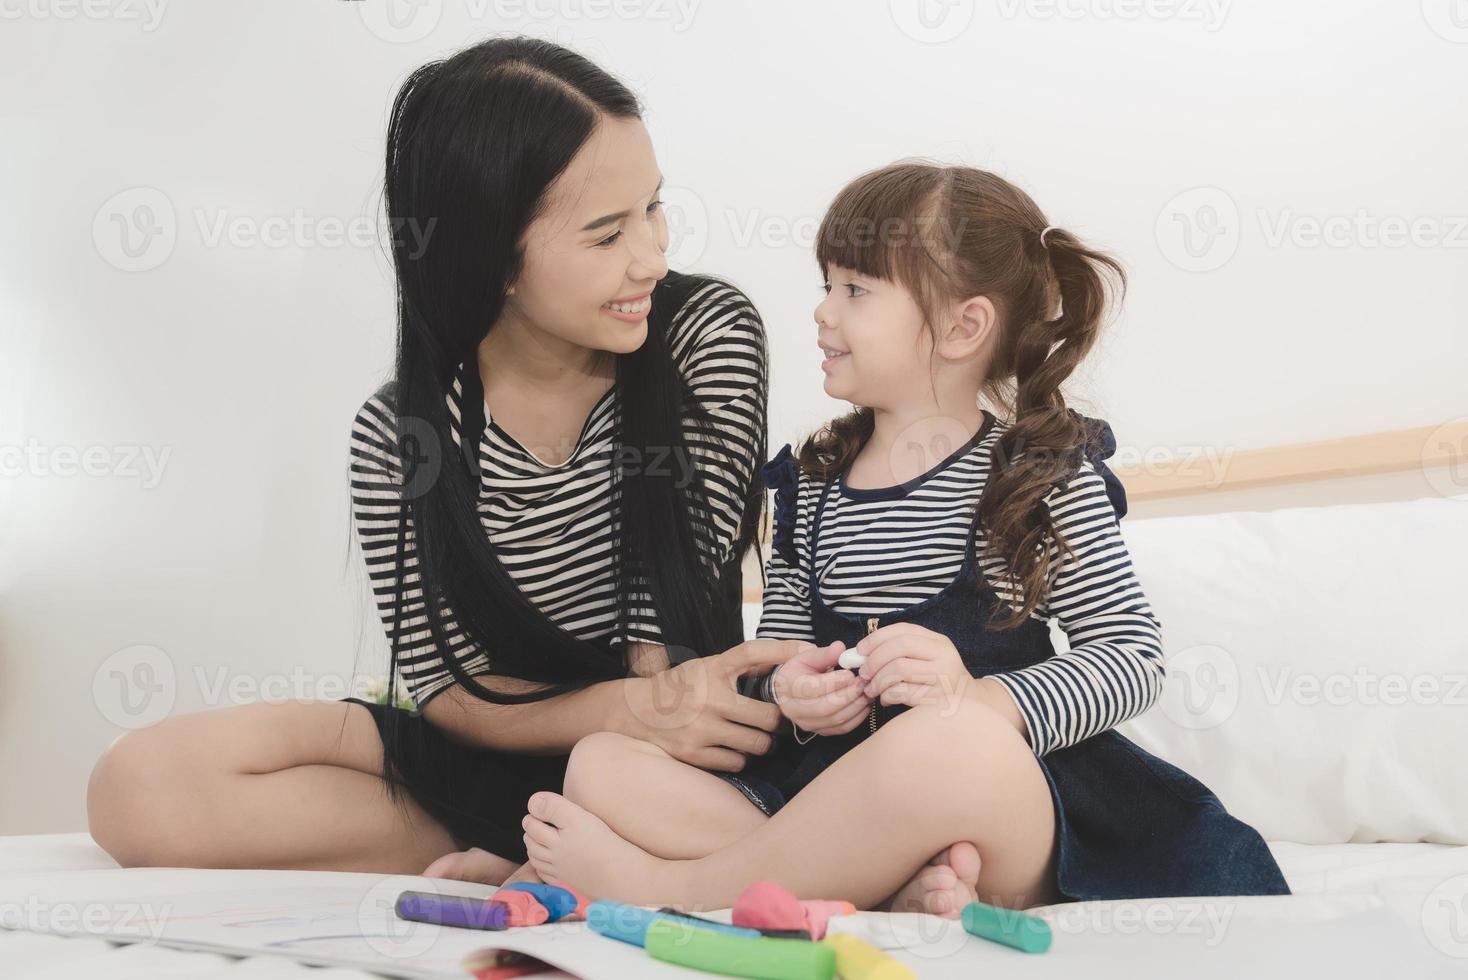 Happy loving family, asian young mother playing with her daughter in kid's room. Photo design for family, kids and happy people concept.